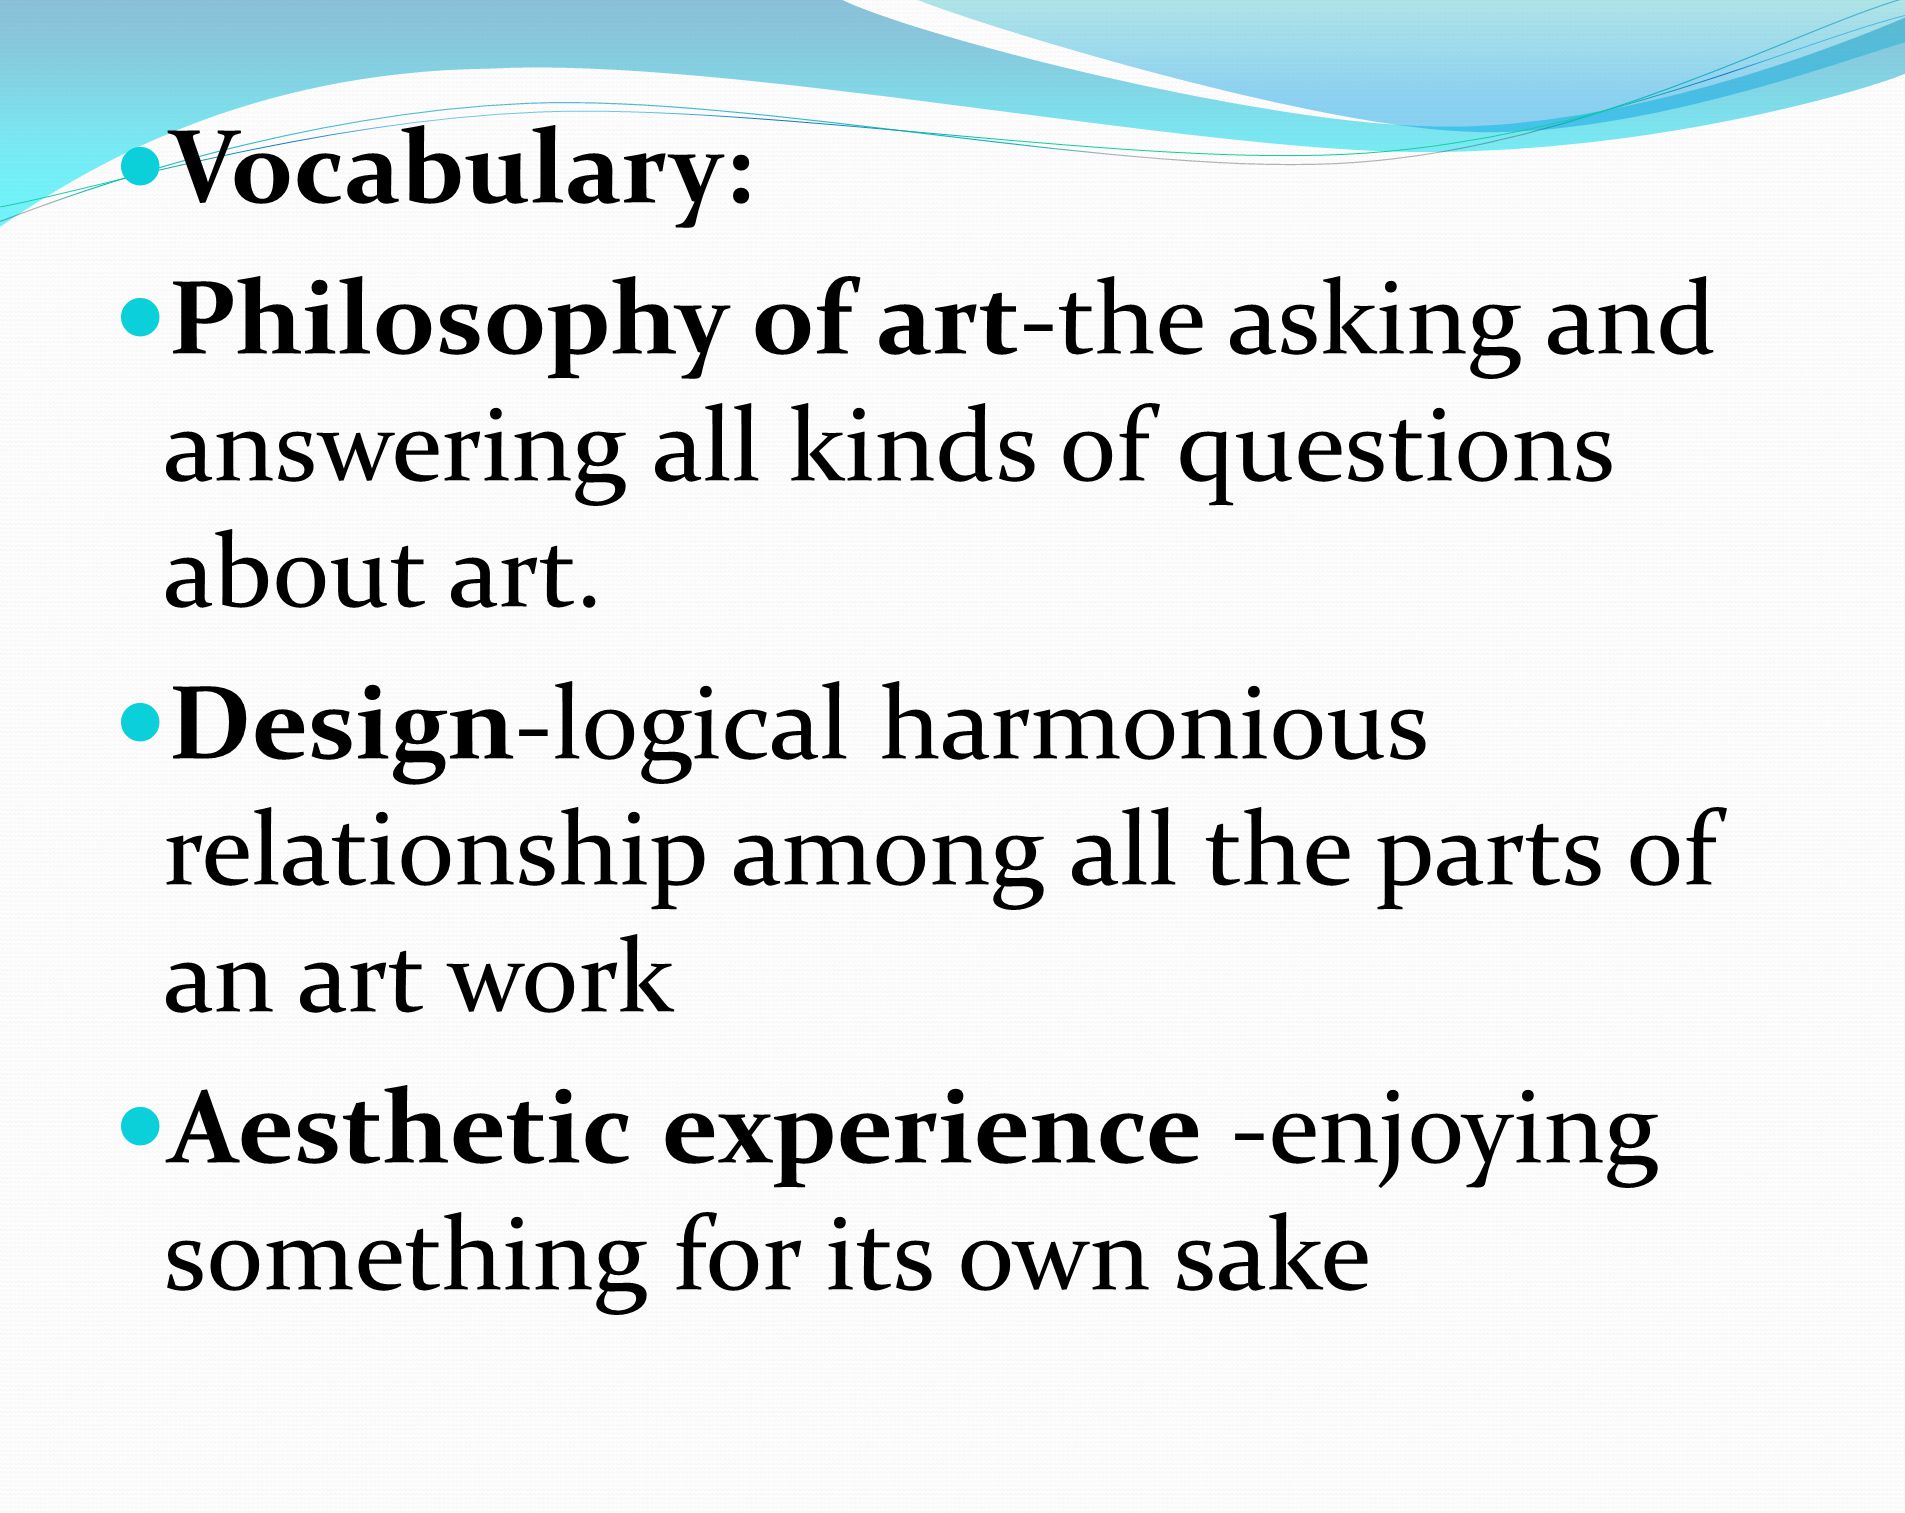 Vocabulary: Philosophy of art-the asking and answering all kinds of questions about art.